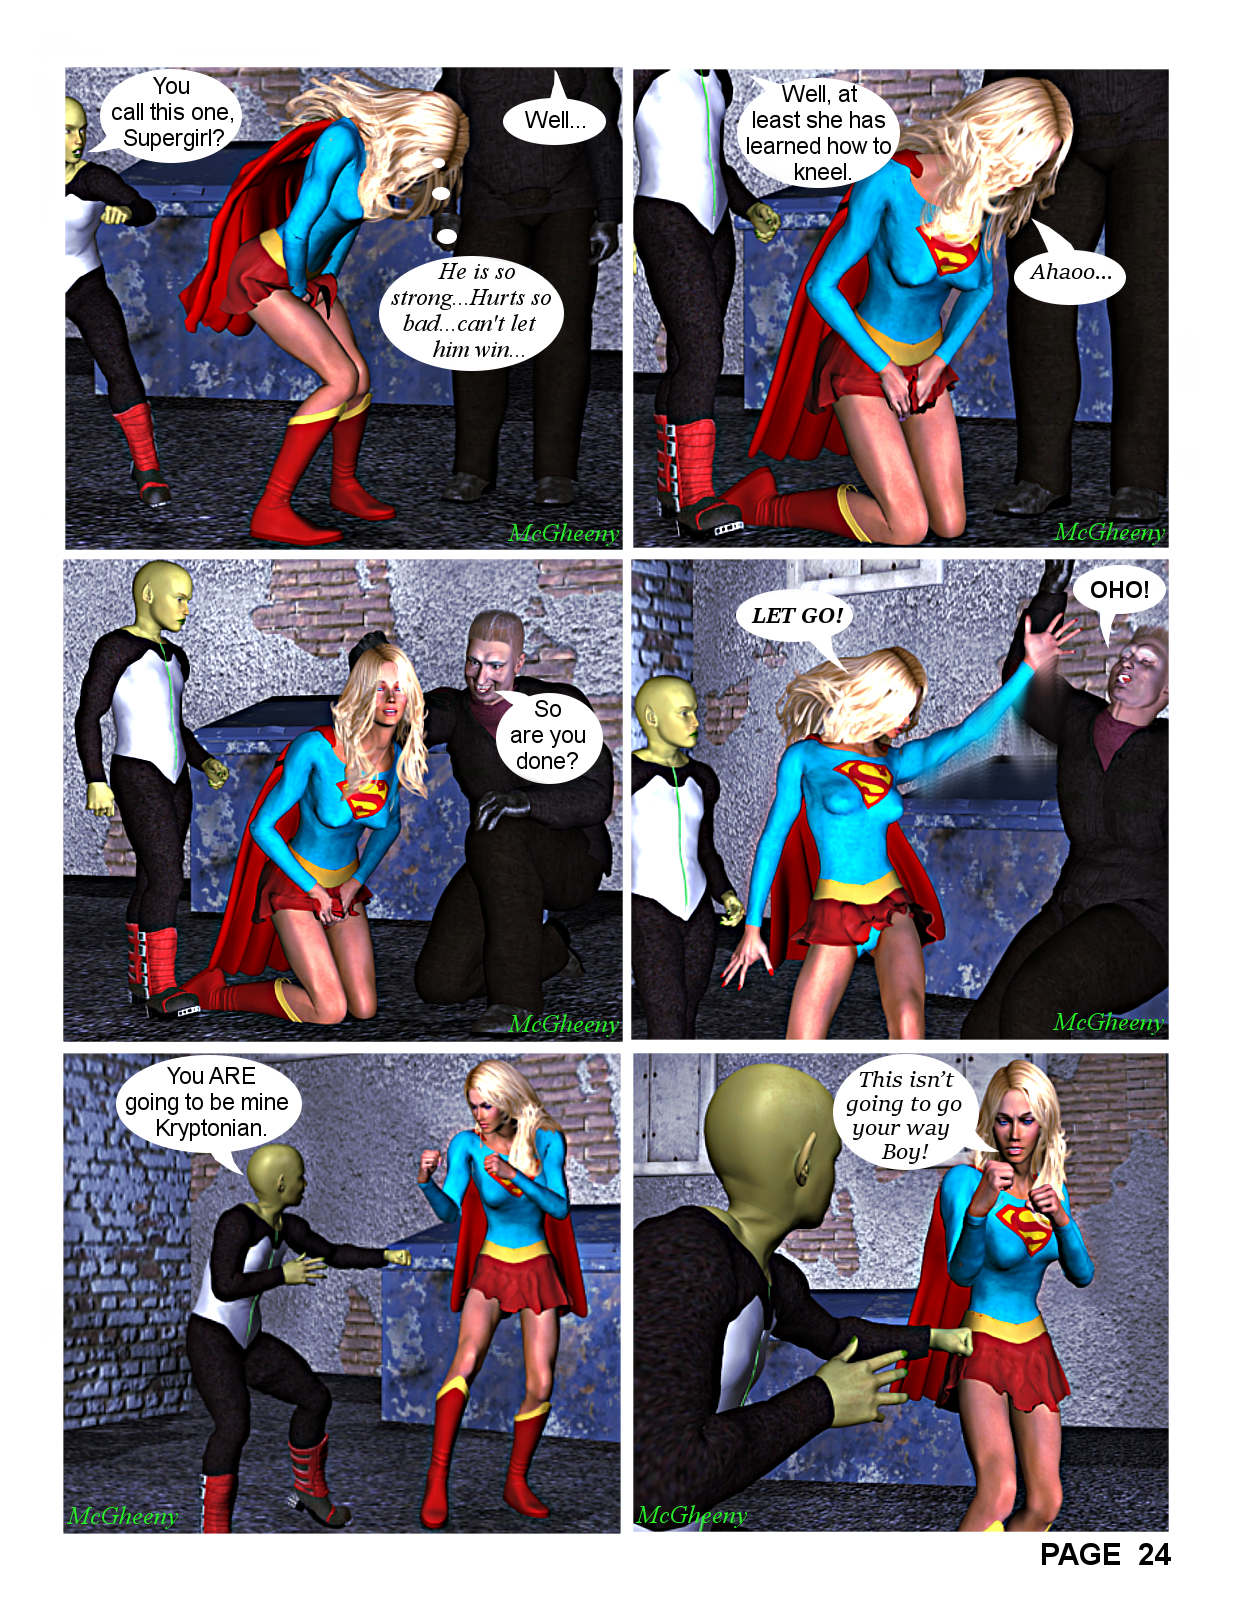 Supergirl in Banors Prize Page 24.png